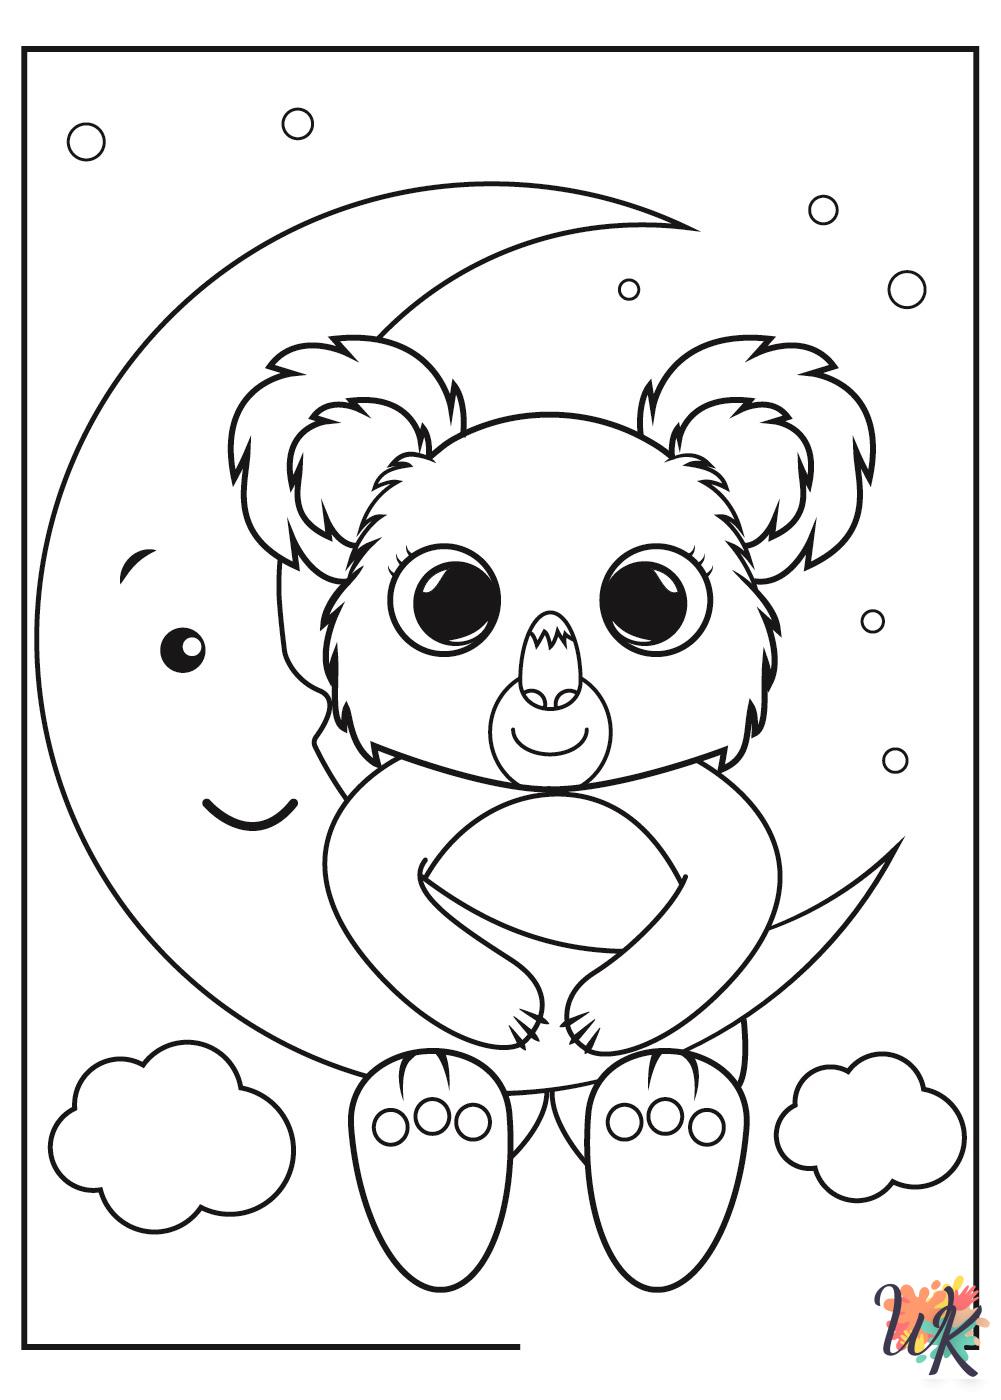 Koala free coloring pages